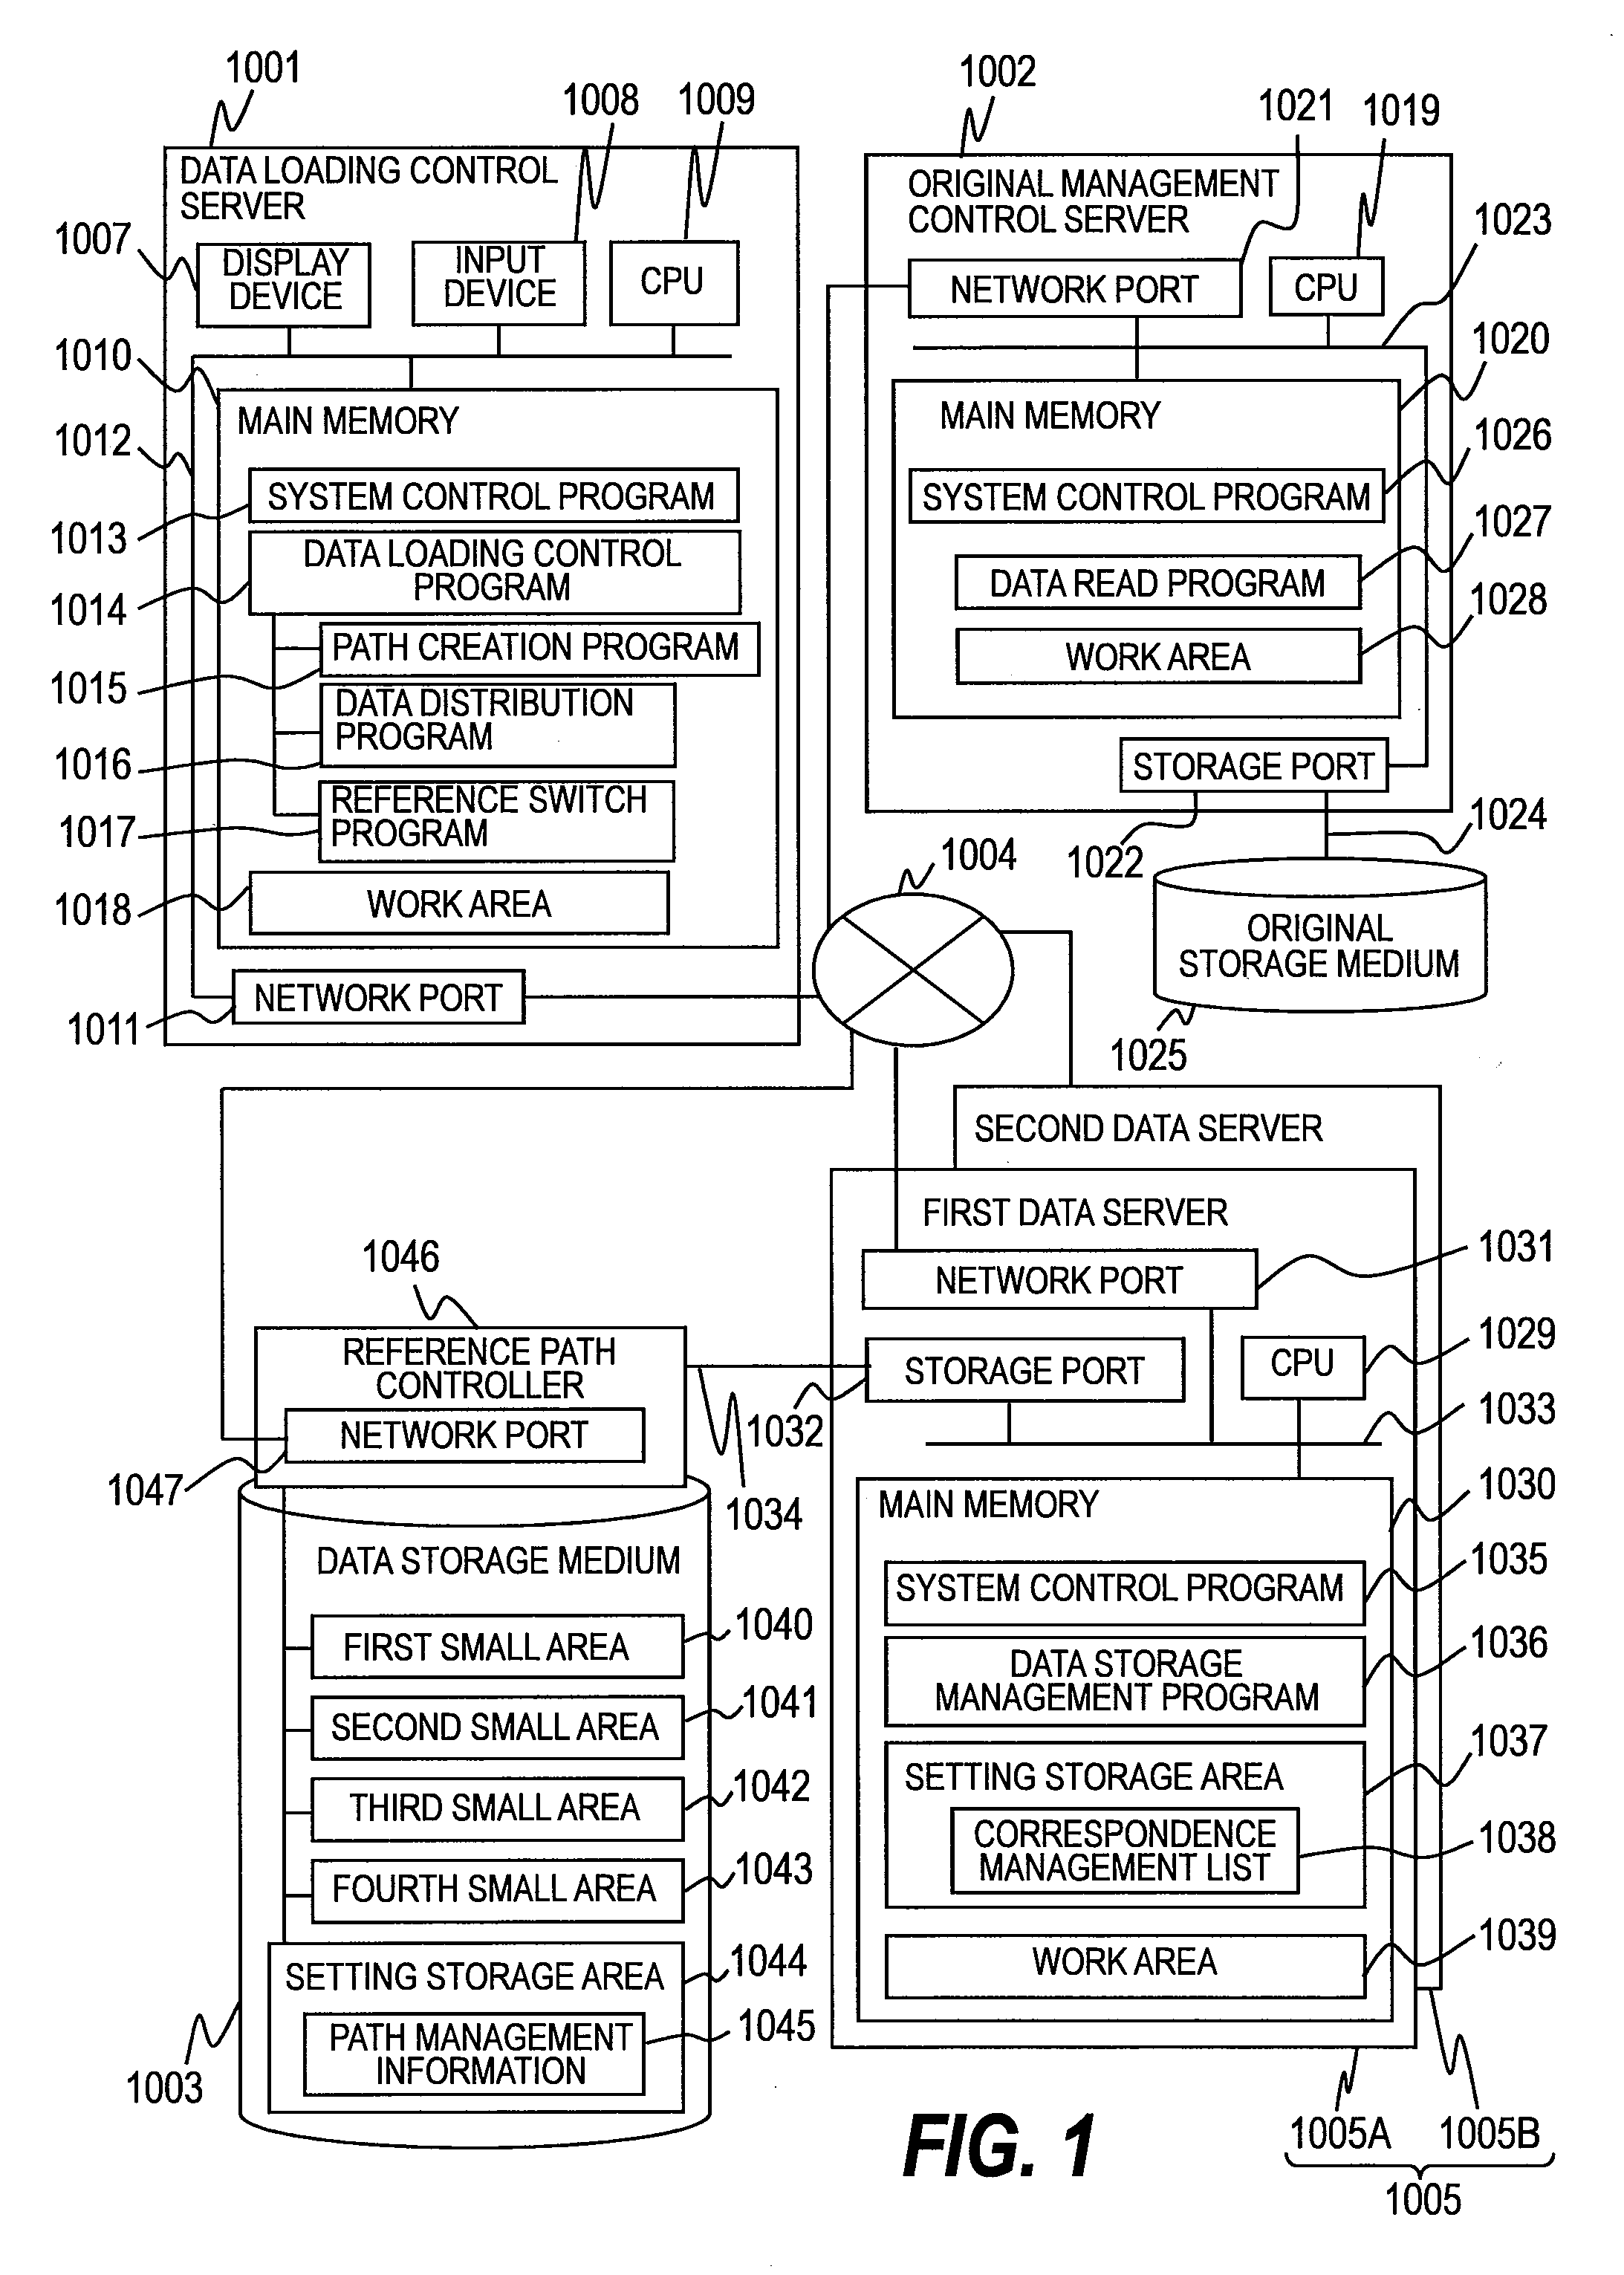 Data management method for accessing data storage area based on characteristic of stored data